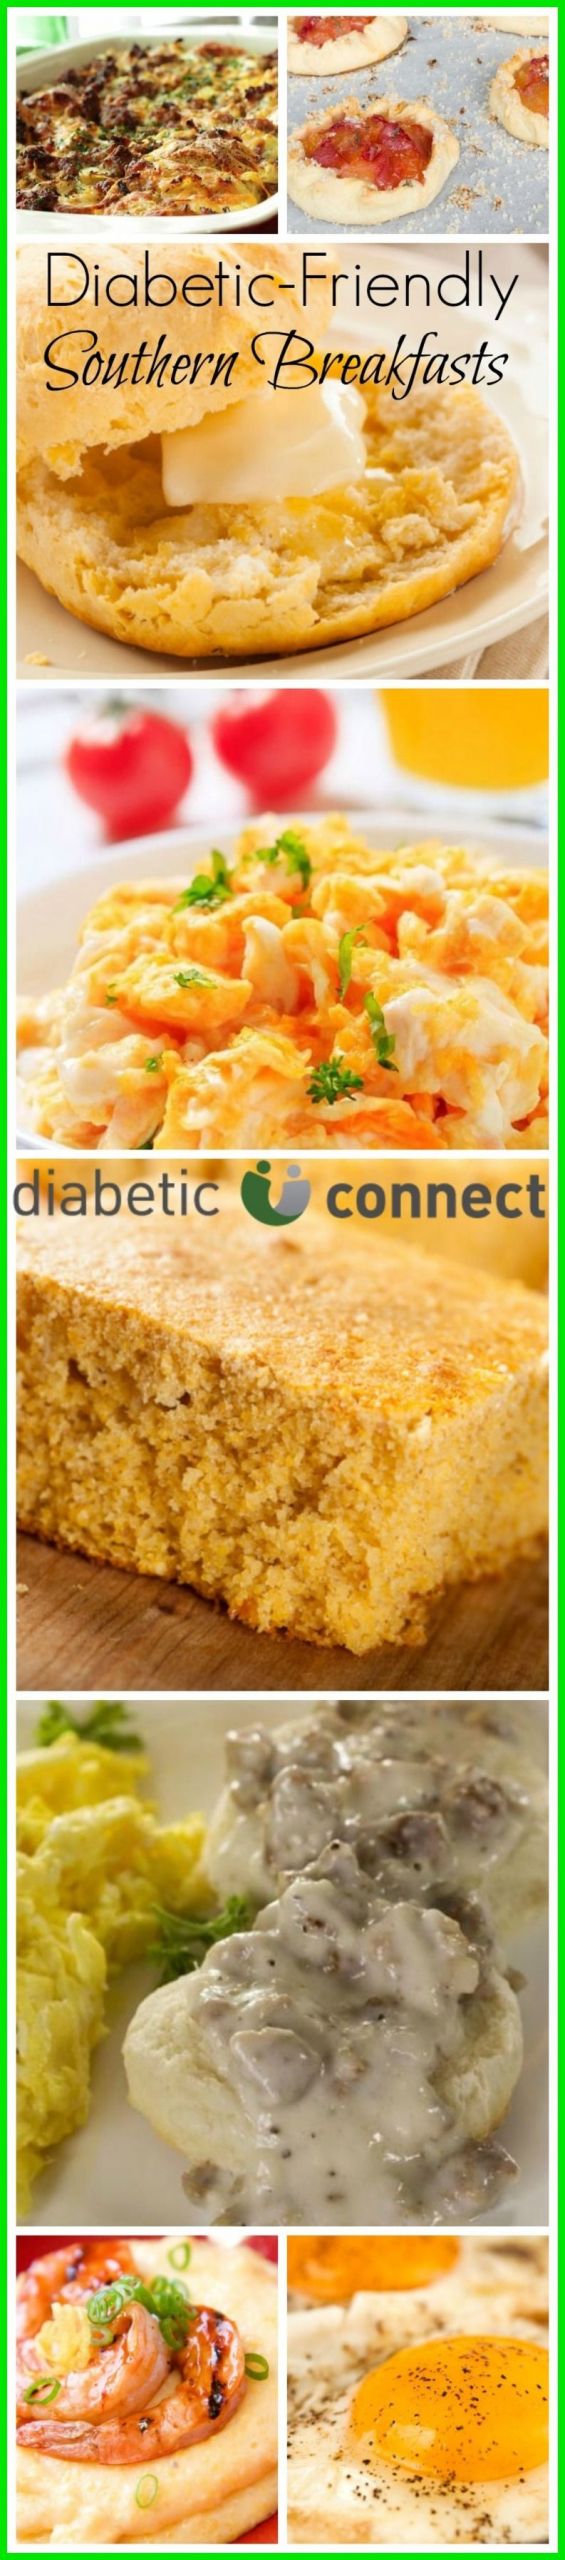 Low Carb Diet For Diabetics Type 2 Recipes
 Type 2 Diabetes Beneficial Low Carb Recipes